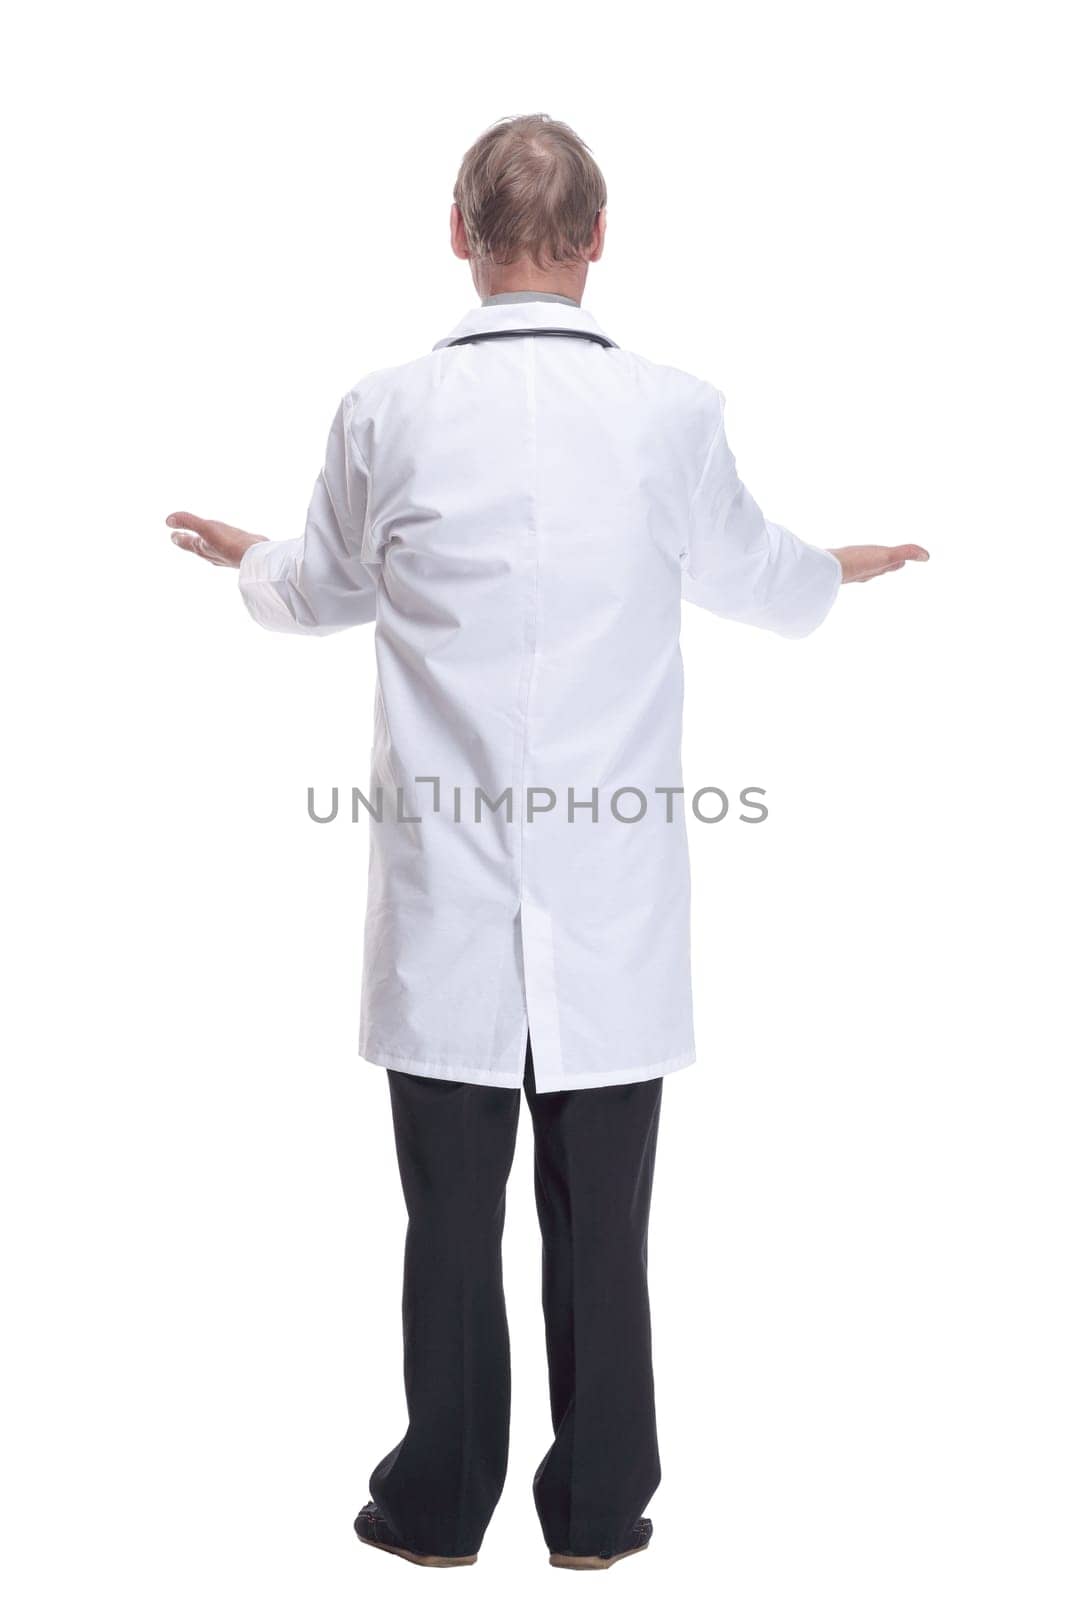 in full growth.Mature doctor with a stethoscope reading an ad on a white screen. isolated on a white background.